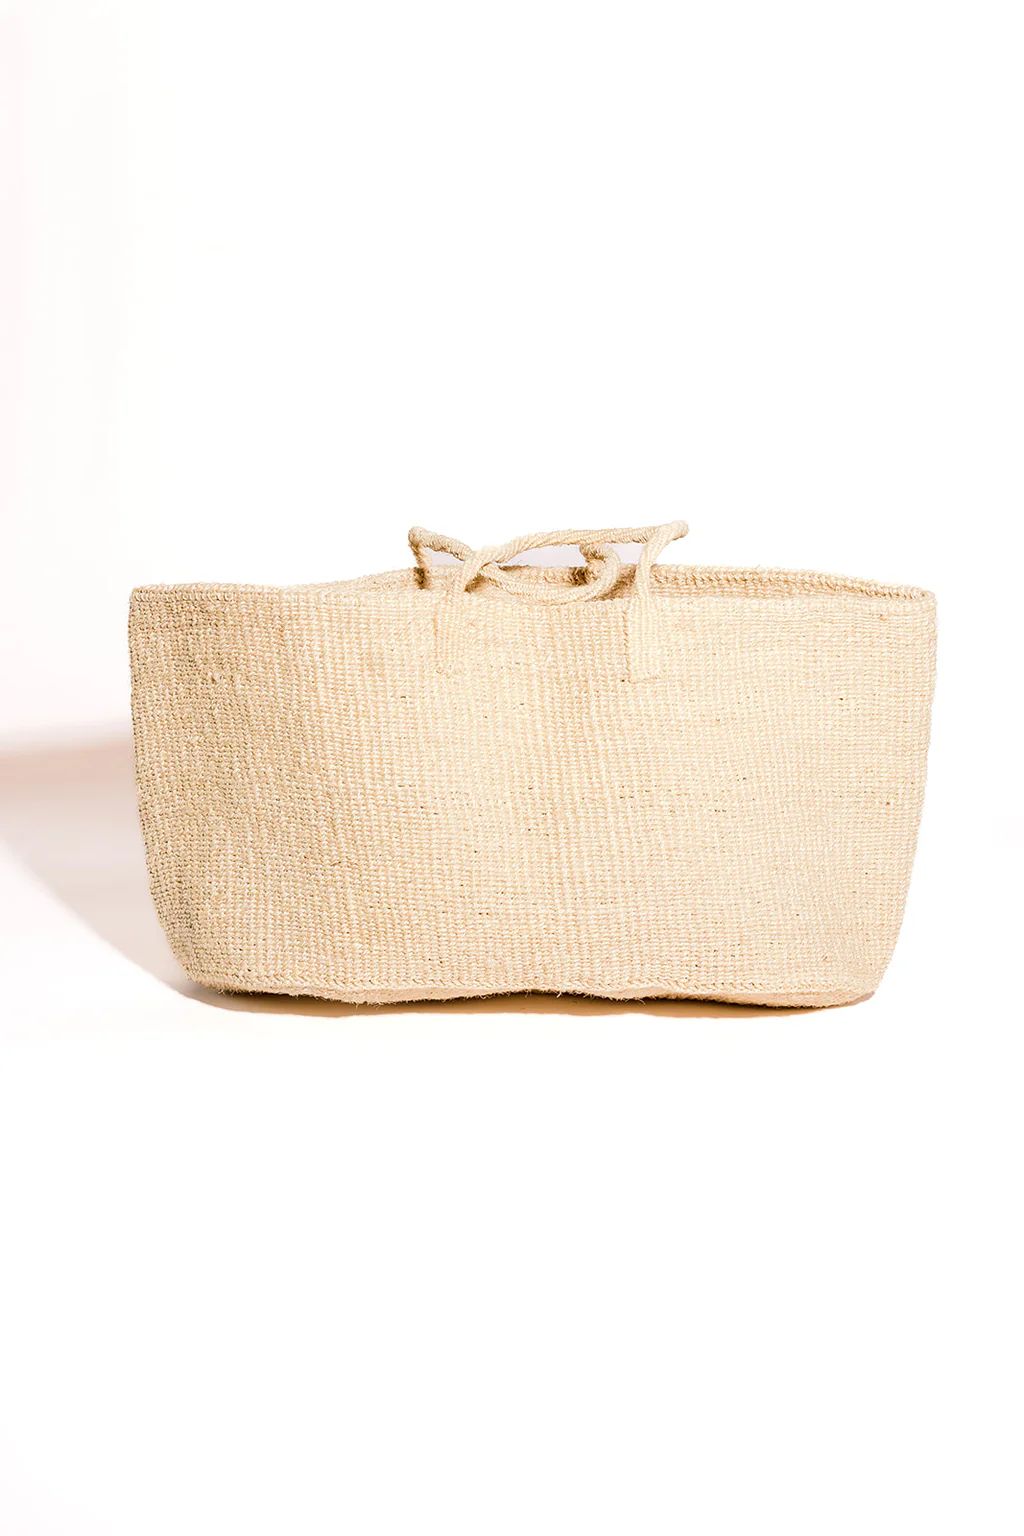 Oversized Sisal Tote | Abby Alley